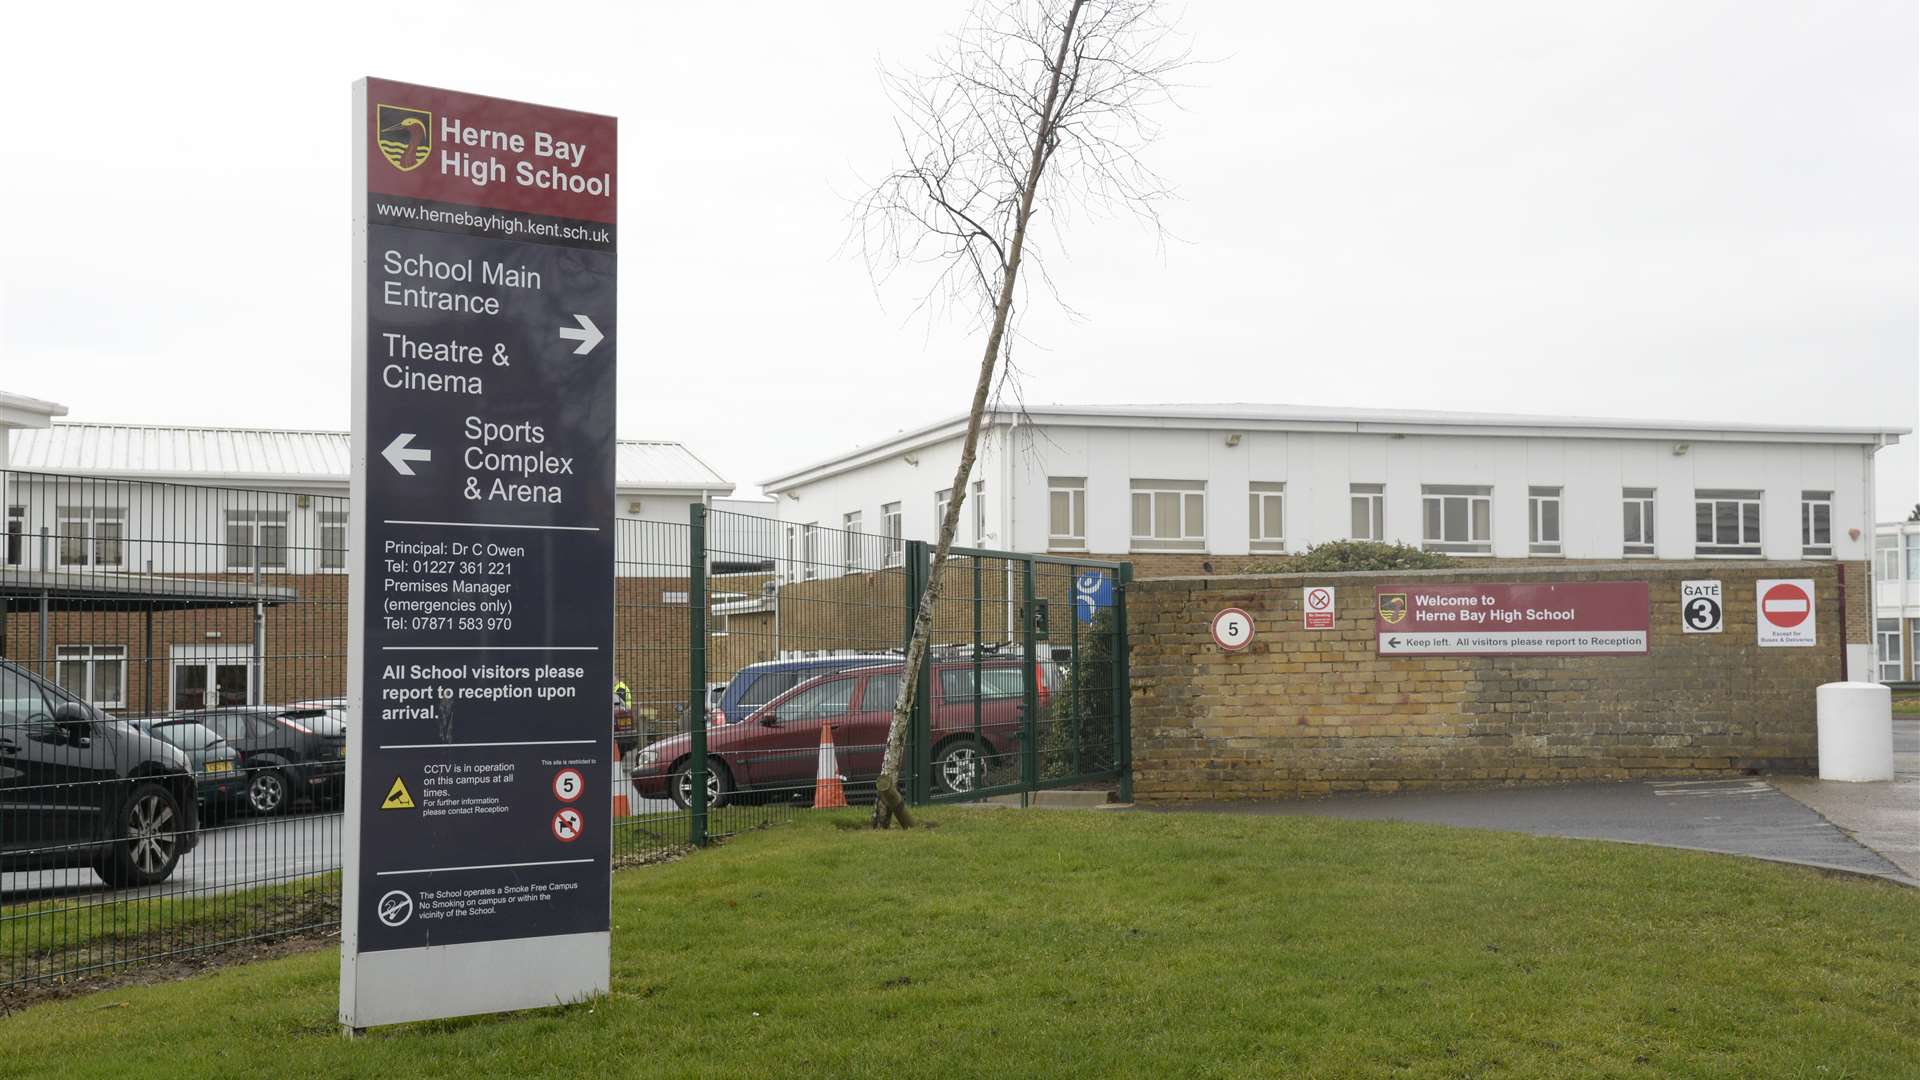 The abuse happened at Herne Bay High School